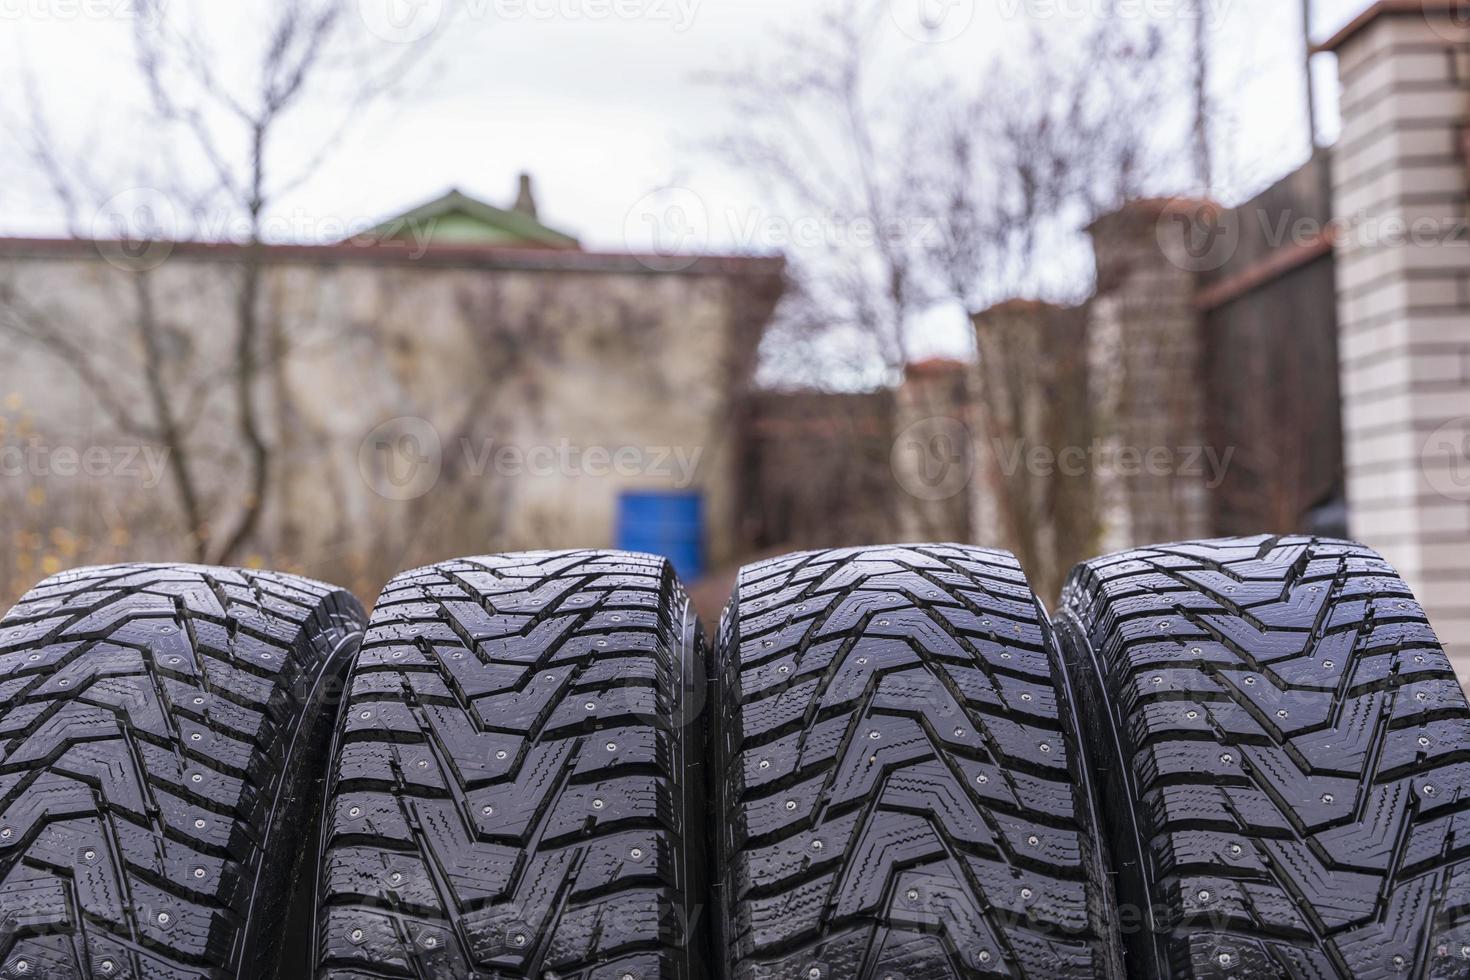 4 winter tires with spikes close-up, safety during winter driving, winter studded tires photo